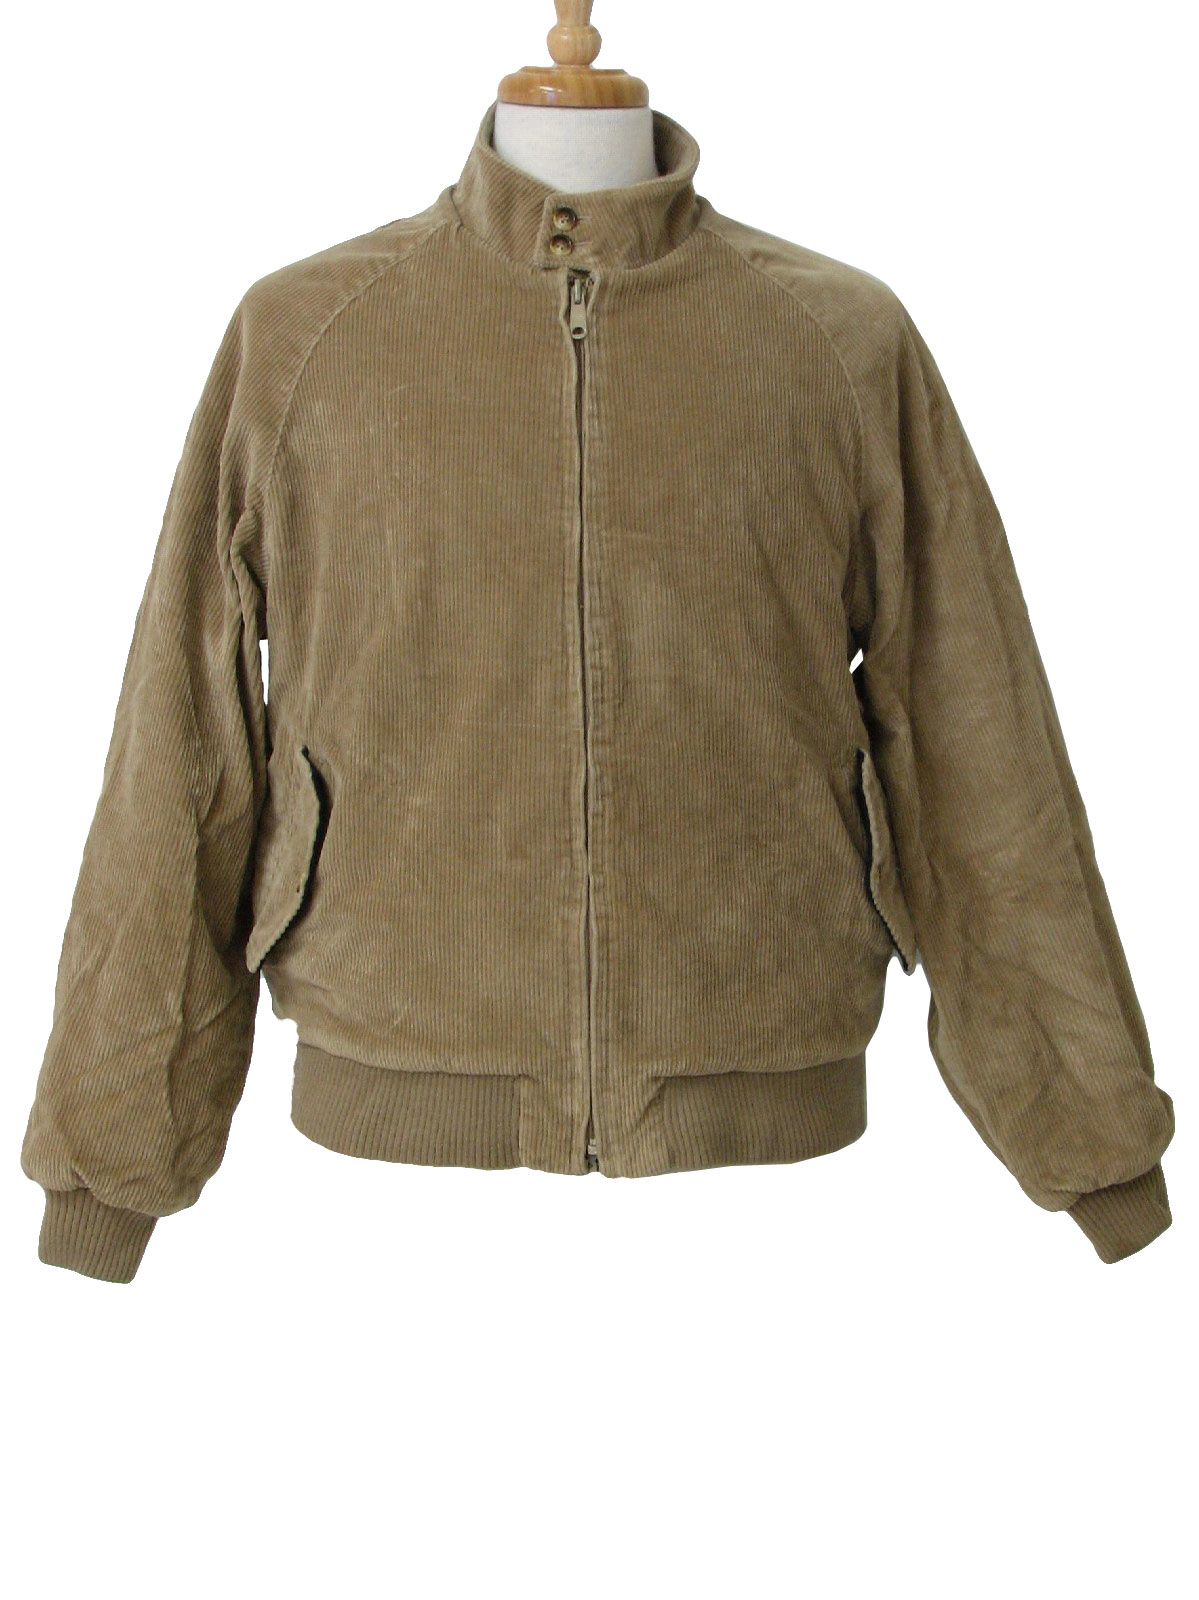 Retro 90's Jacket: 90s -Care Label Only- Mens tan cotton polyester ...